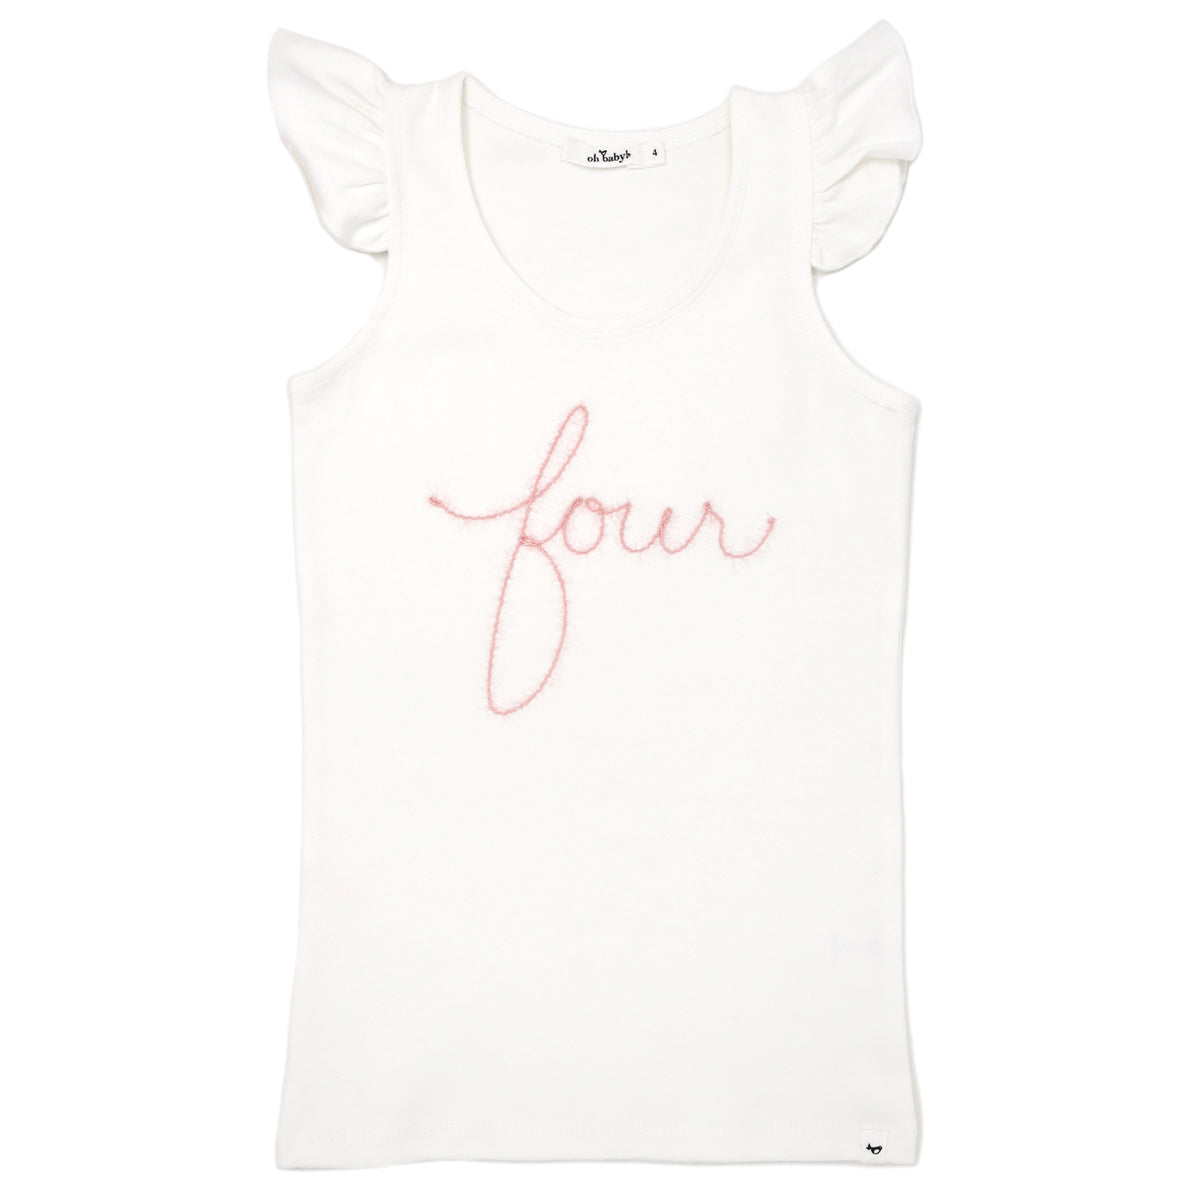 oh baby! Cotton Baby Rib Flutter Sleeve Tank - "Four" Pink Embroidered - Cream